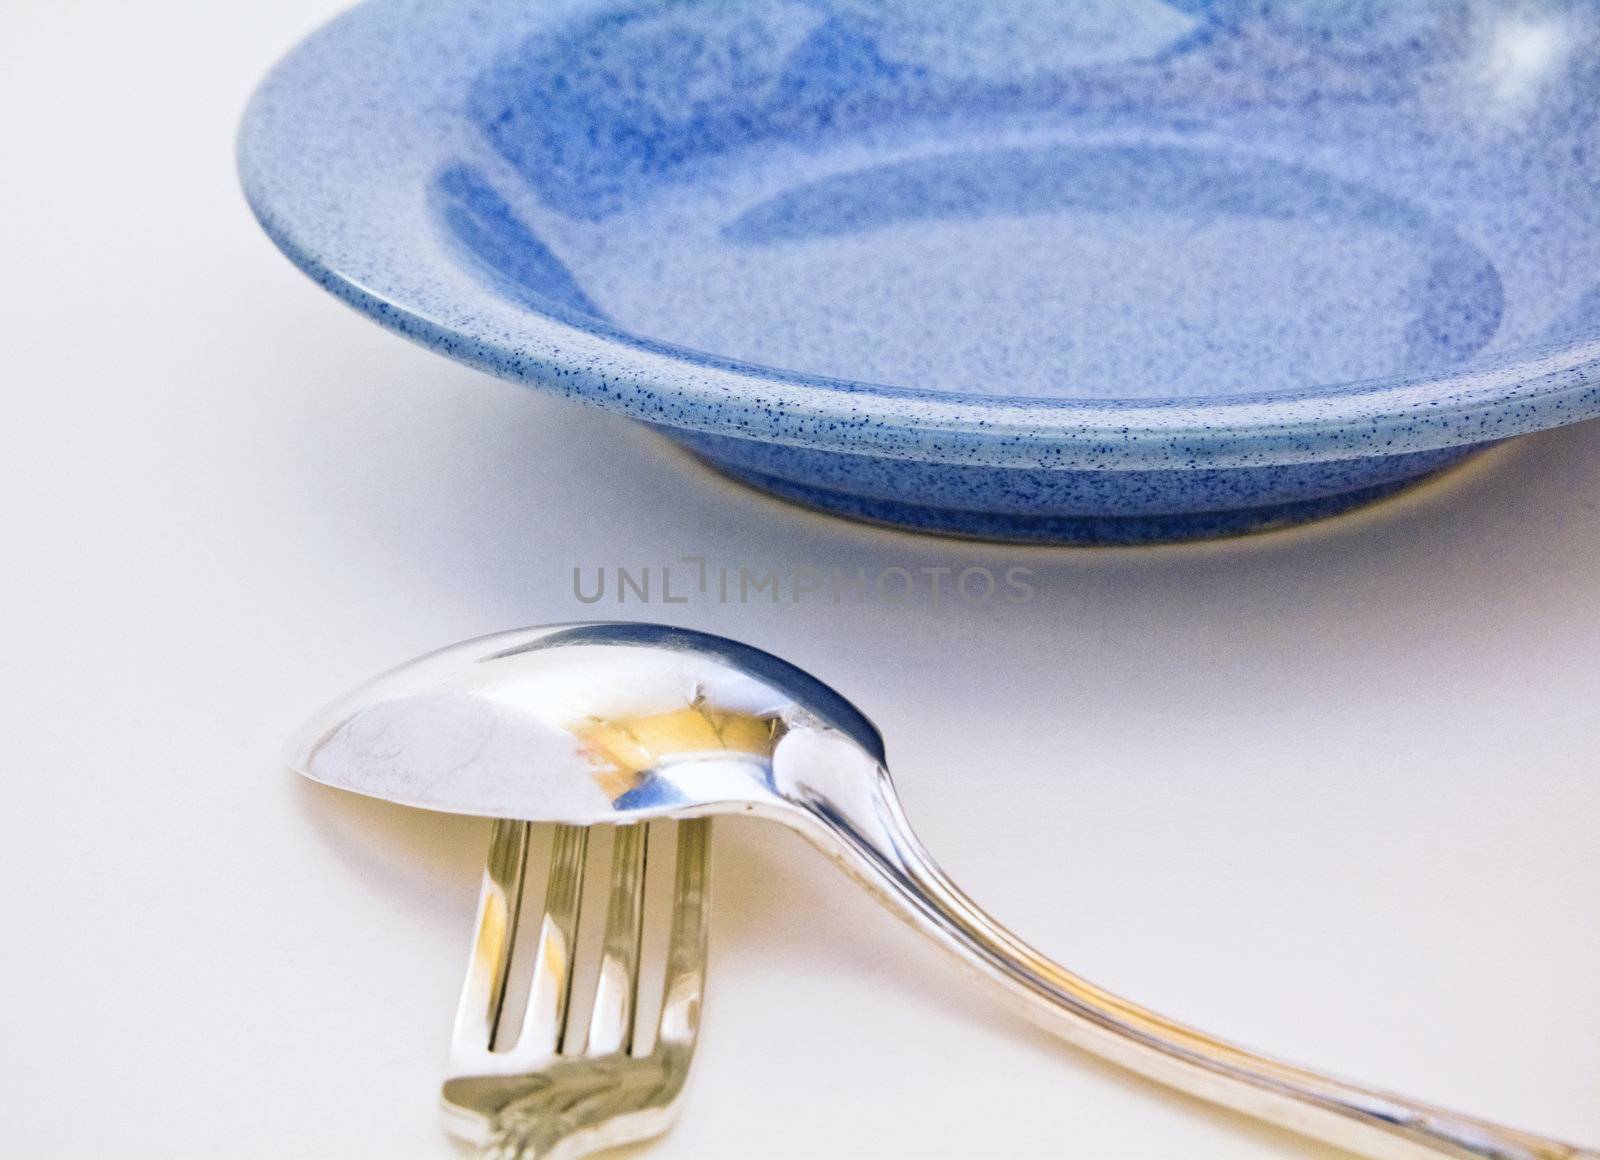 spoon on fork and blue plate on a white background